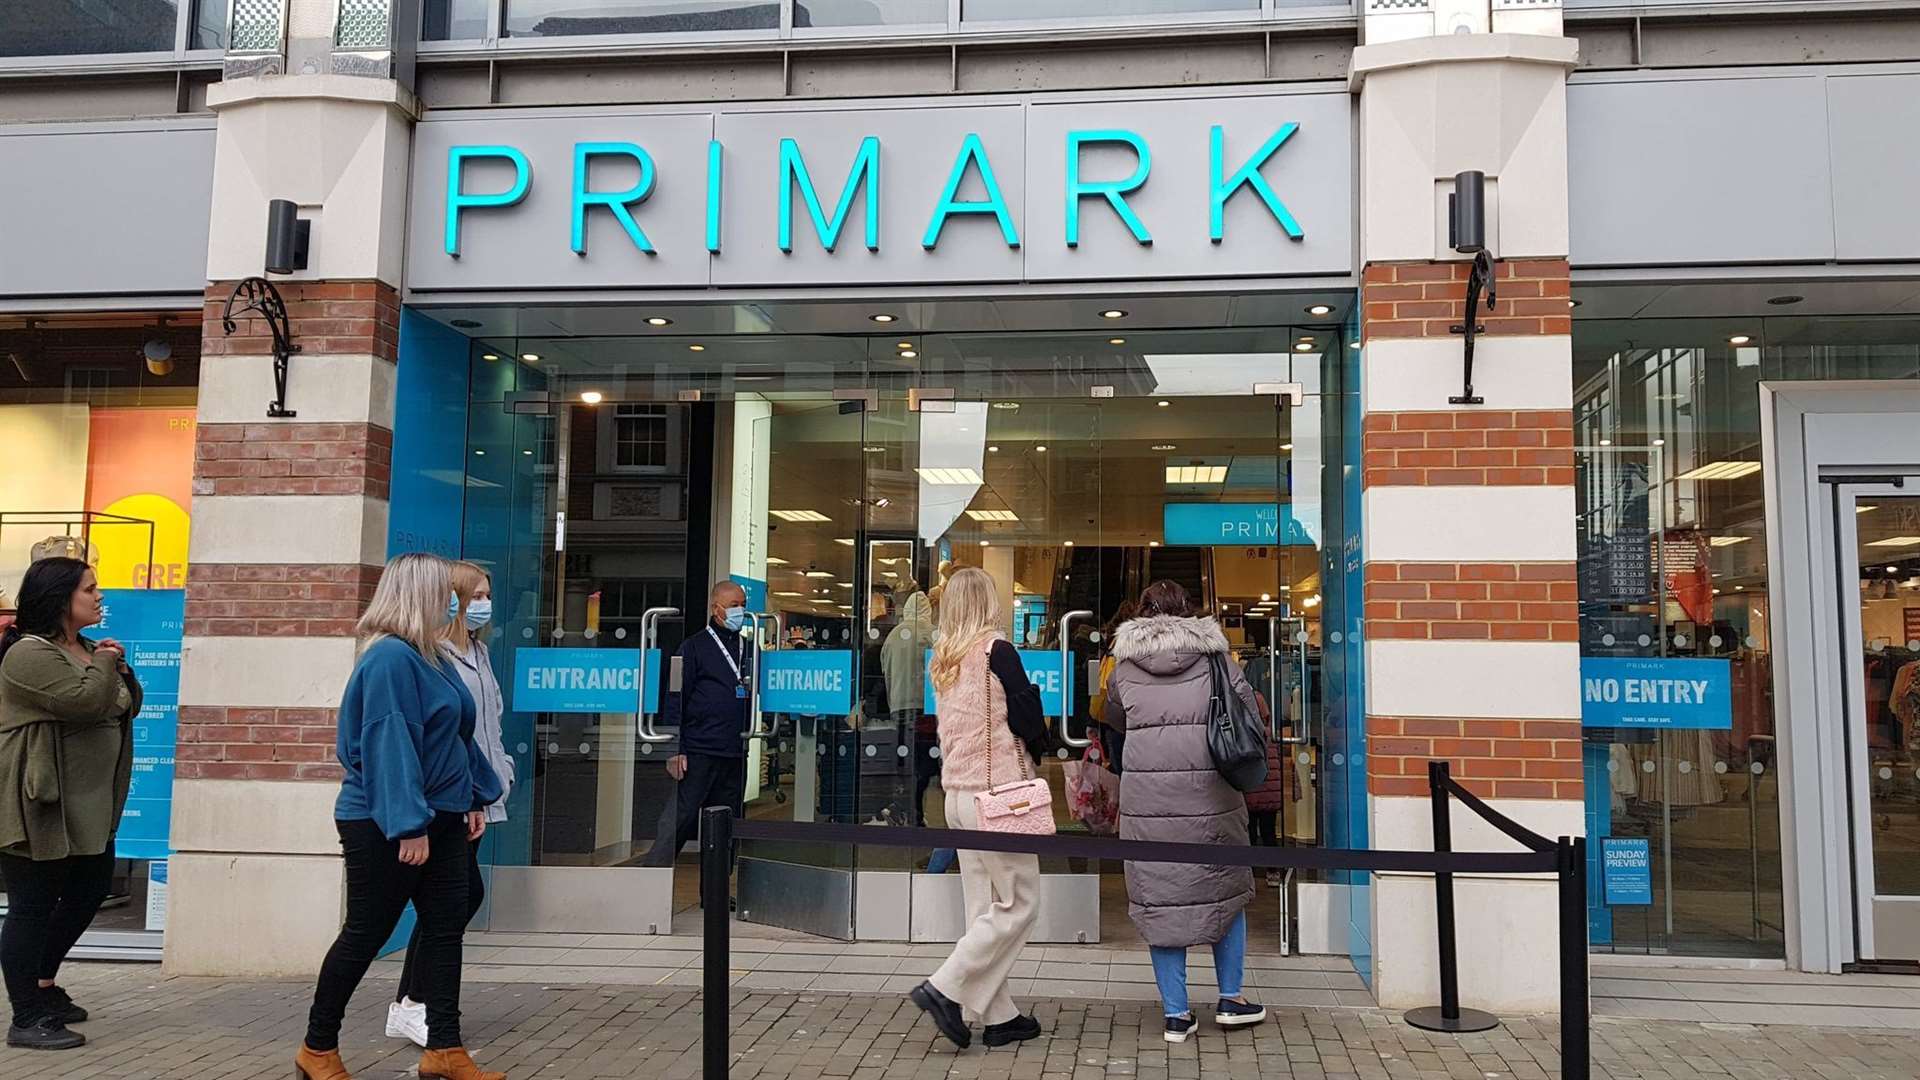 Shoppers have returned to stores since lockdown, says Primark